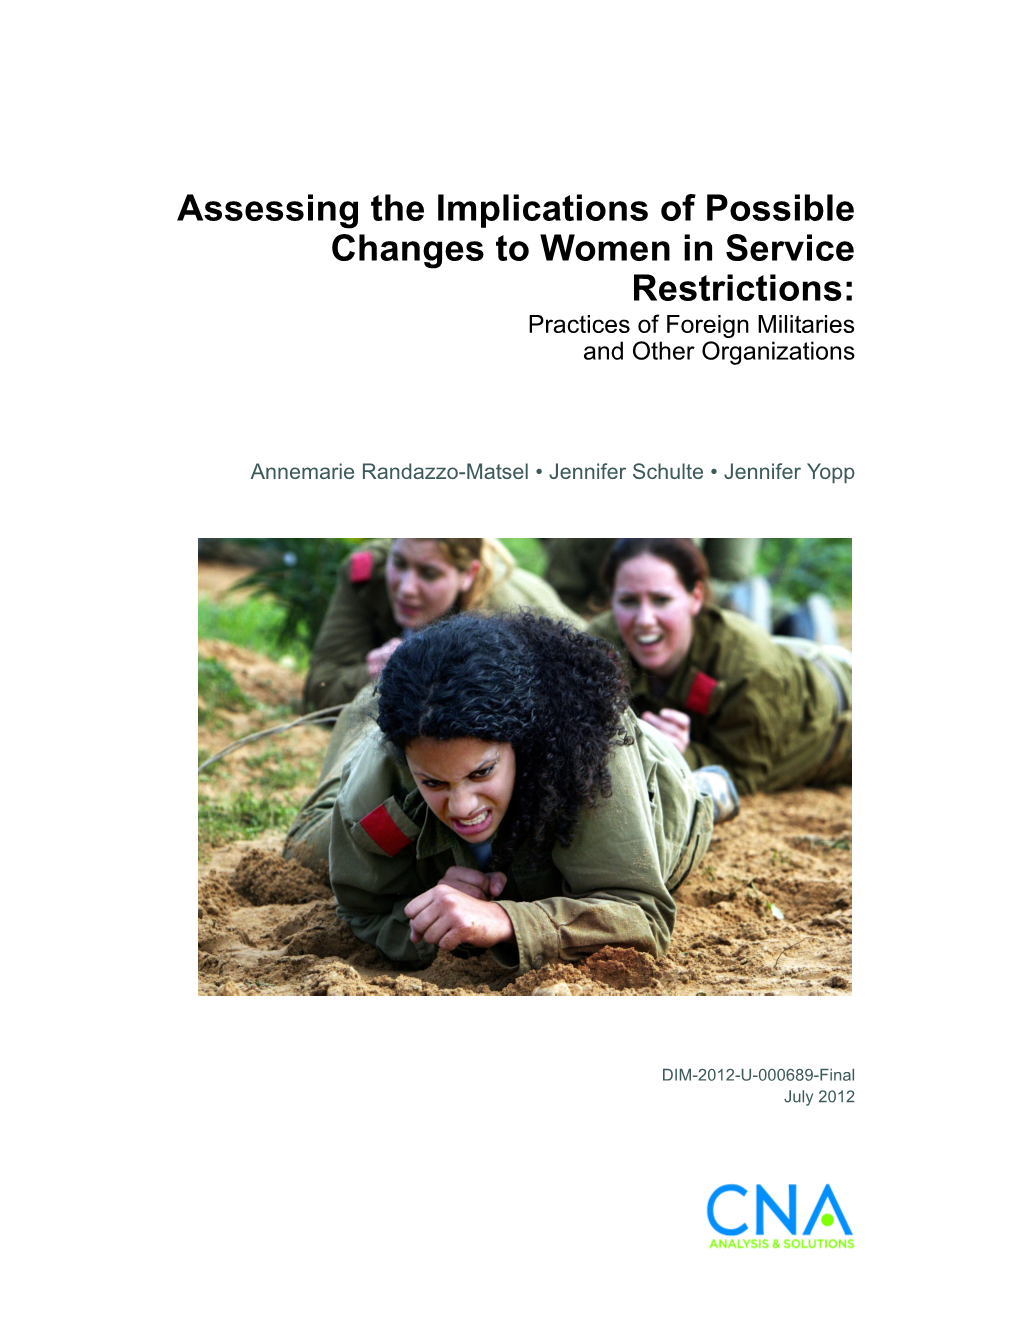 Assessing the Implications of Possible Changes to Women in Service Restrictions: Practices of Foreign Militaries and Other Organizations